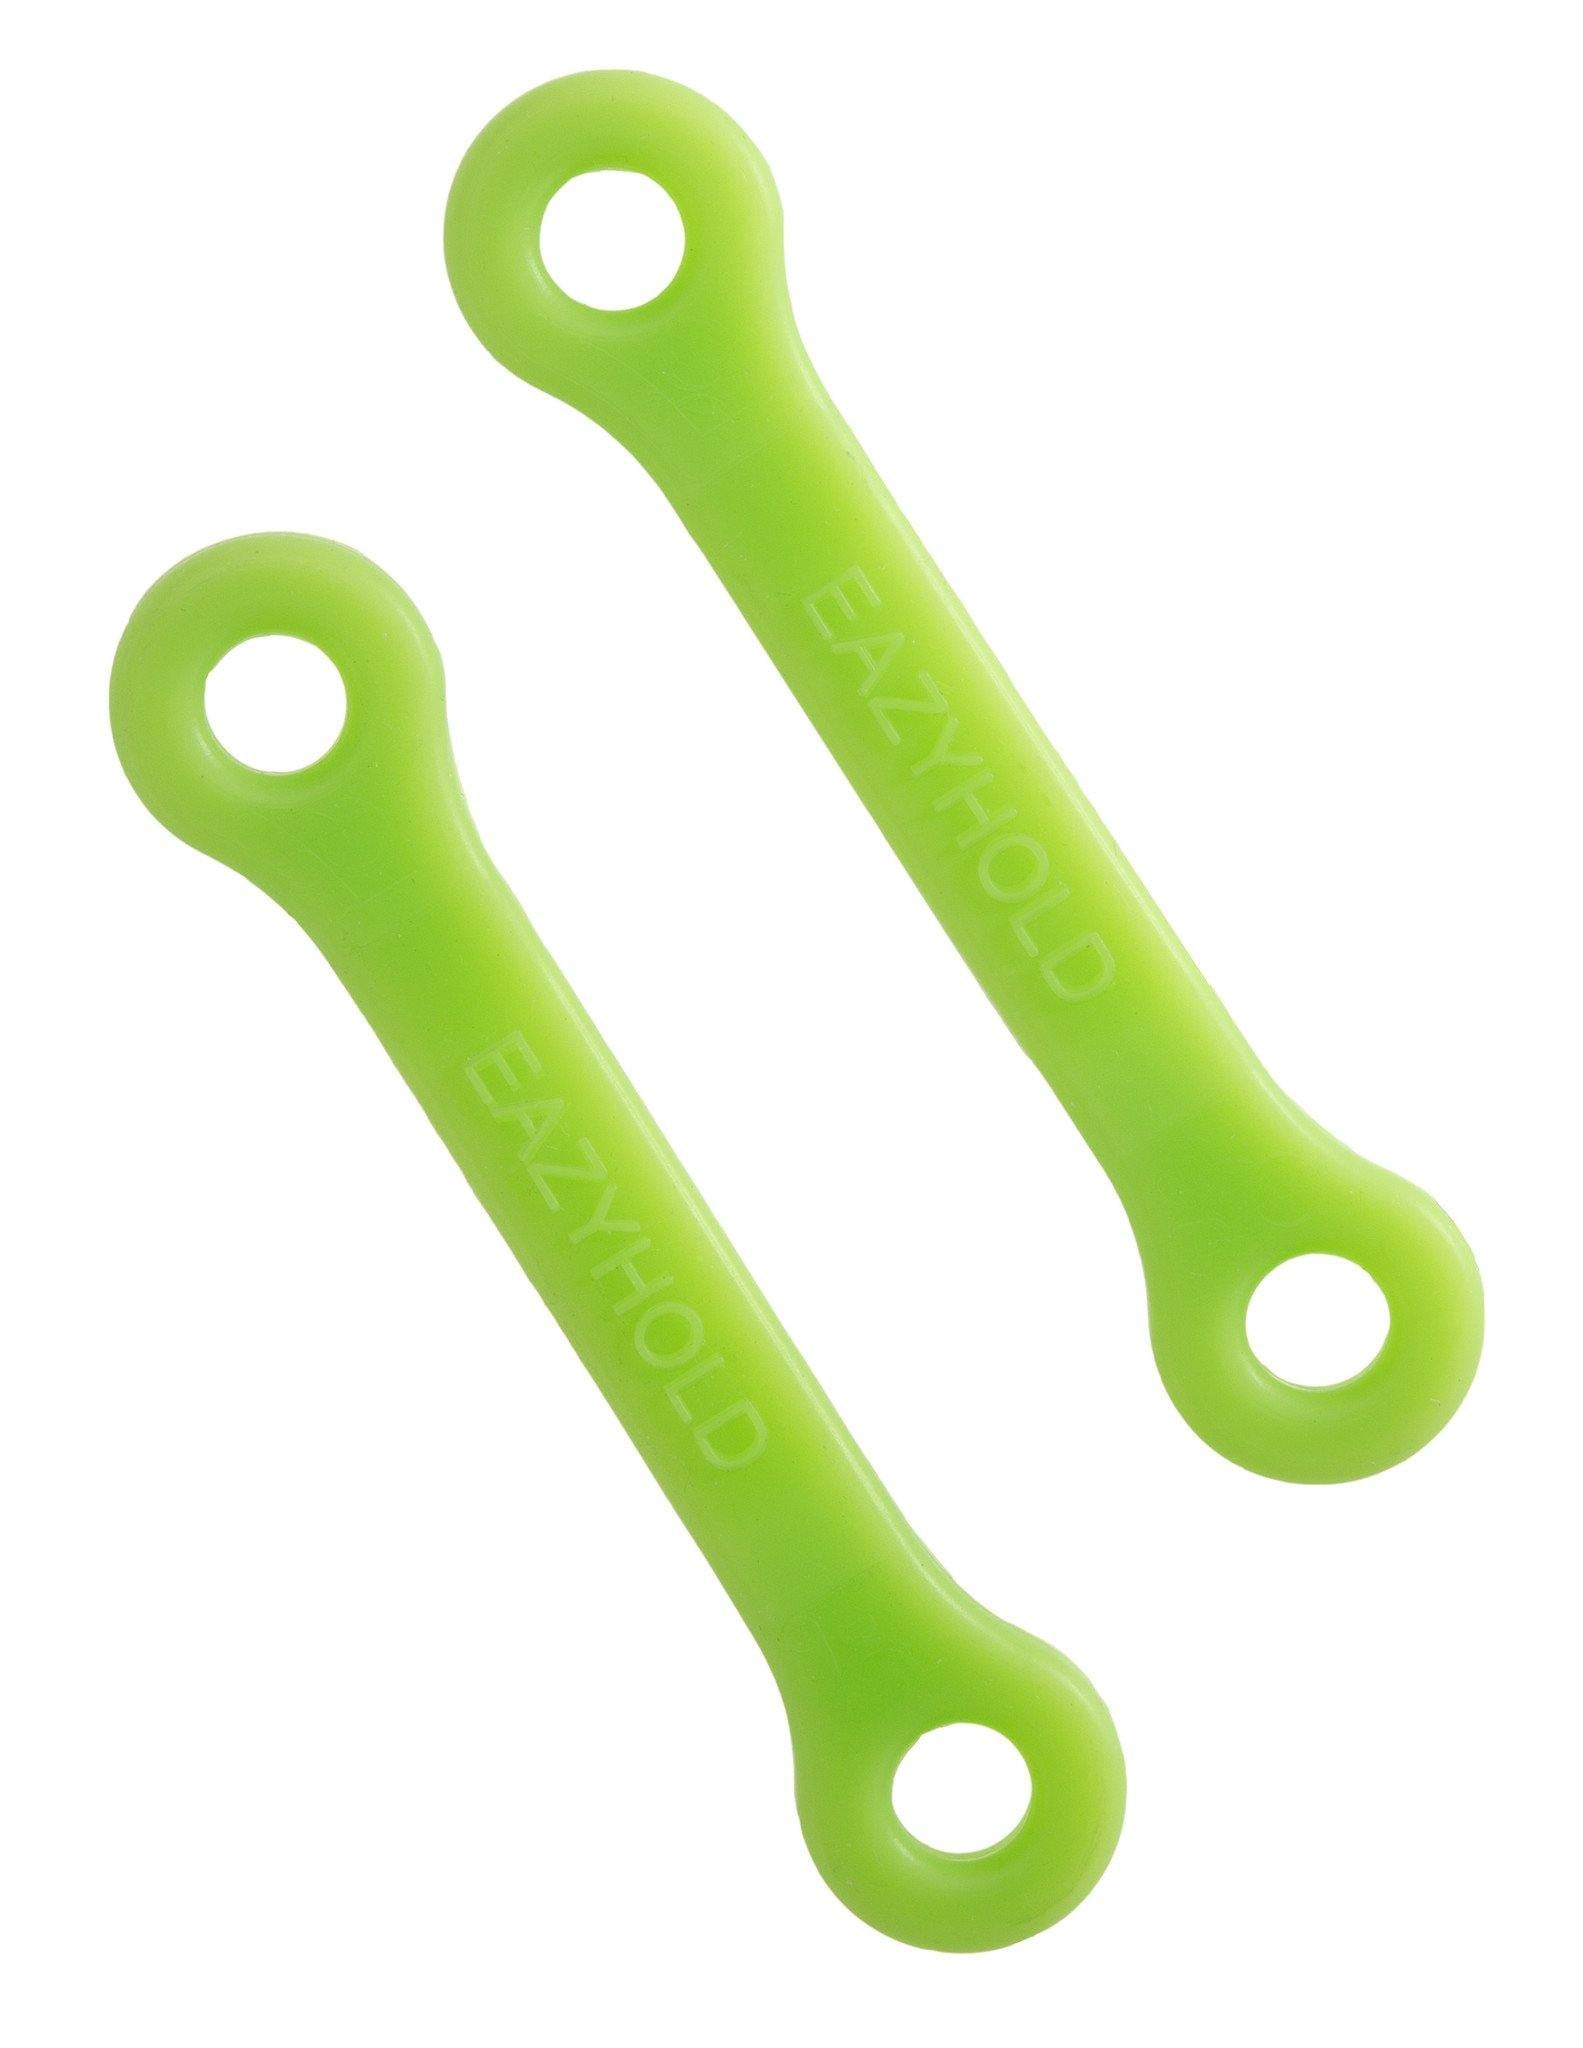 EazyHold Grip Universal Cuff Assist Pack of 2 / Lime